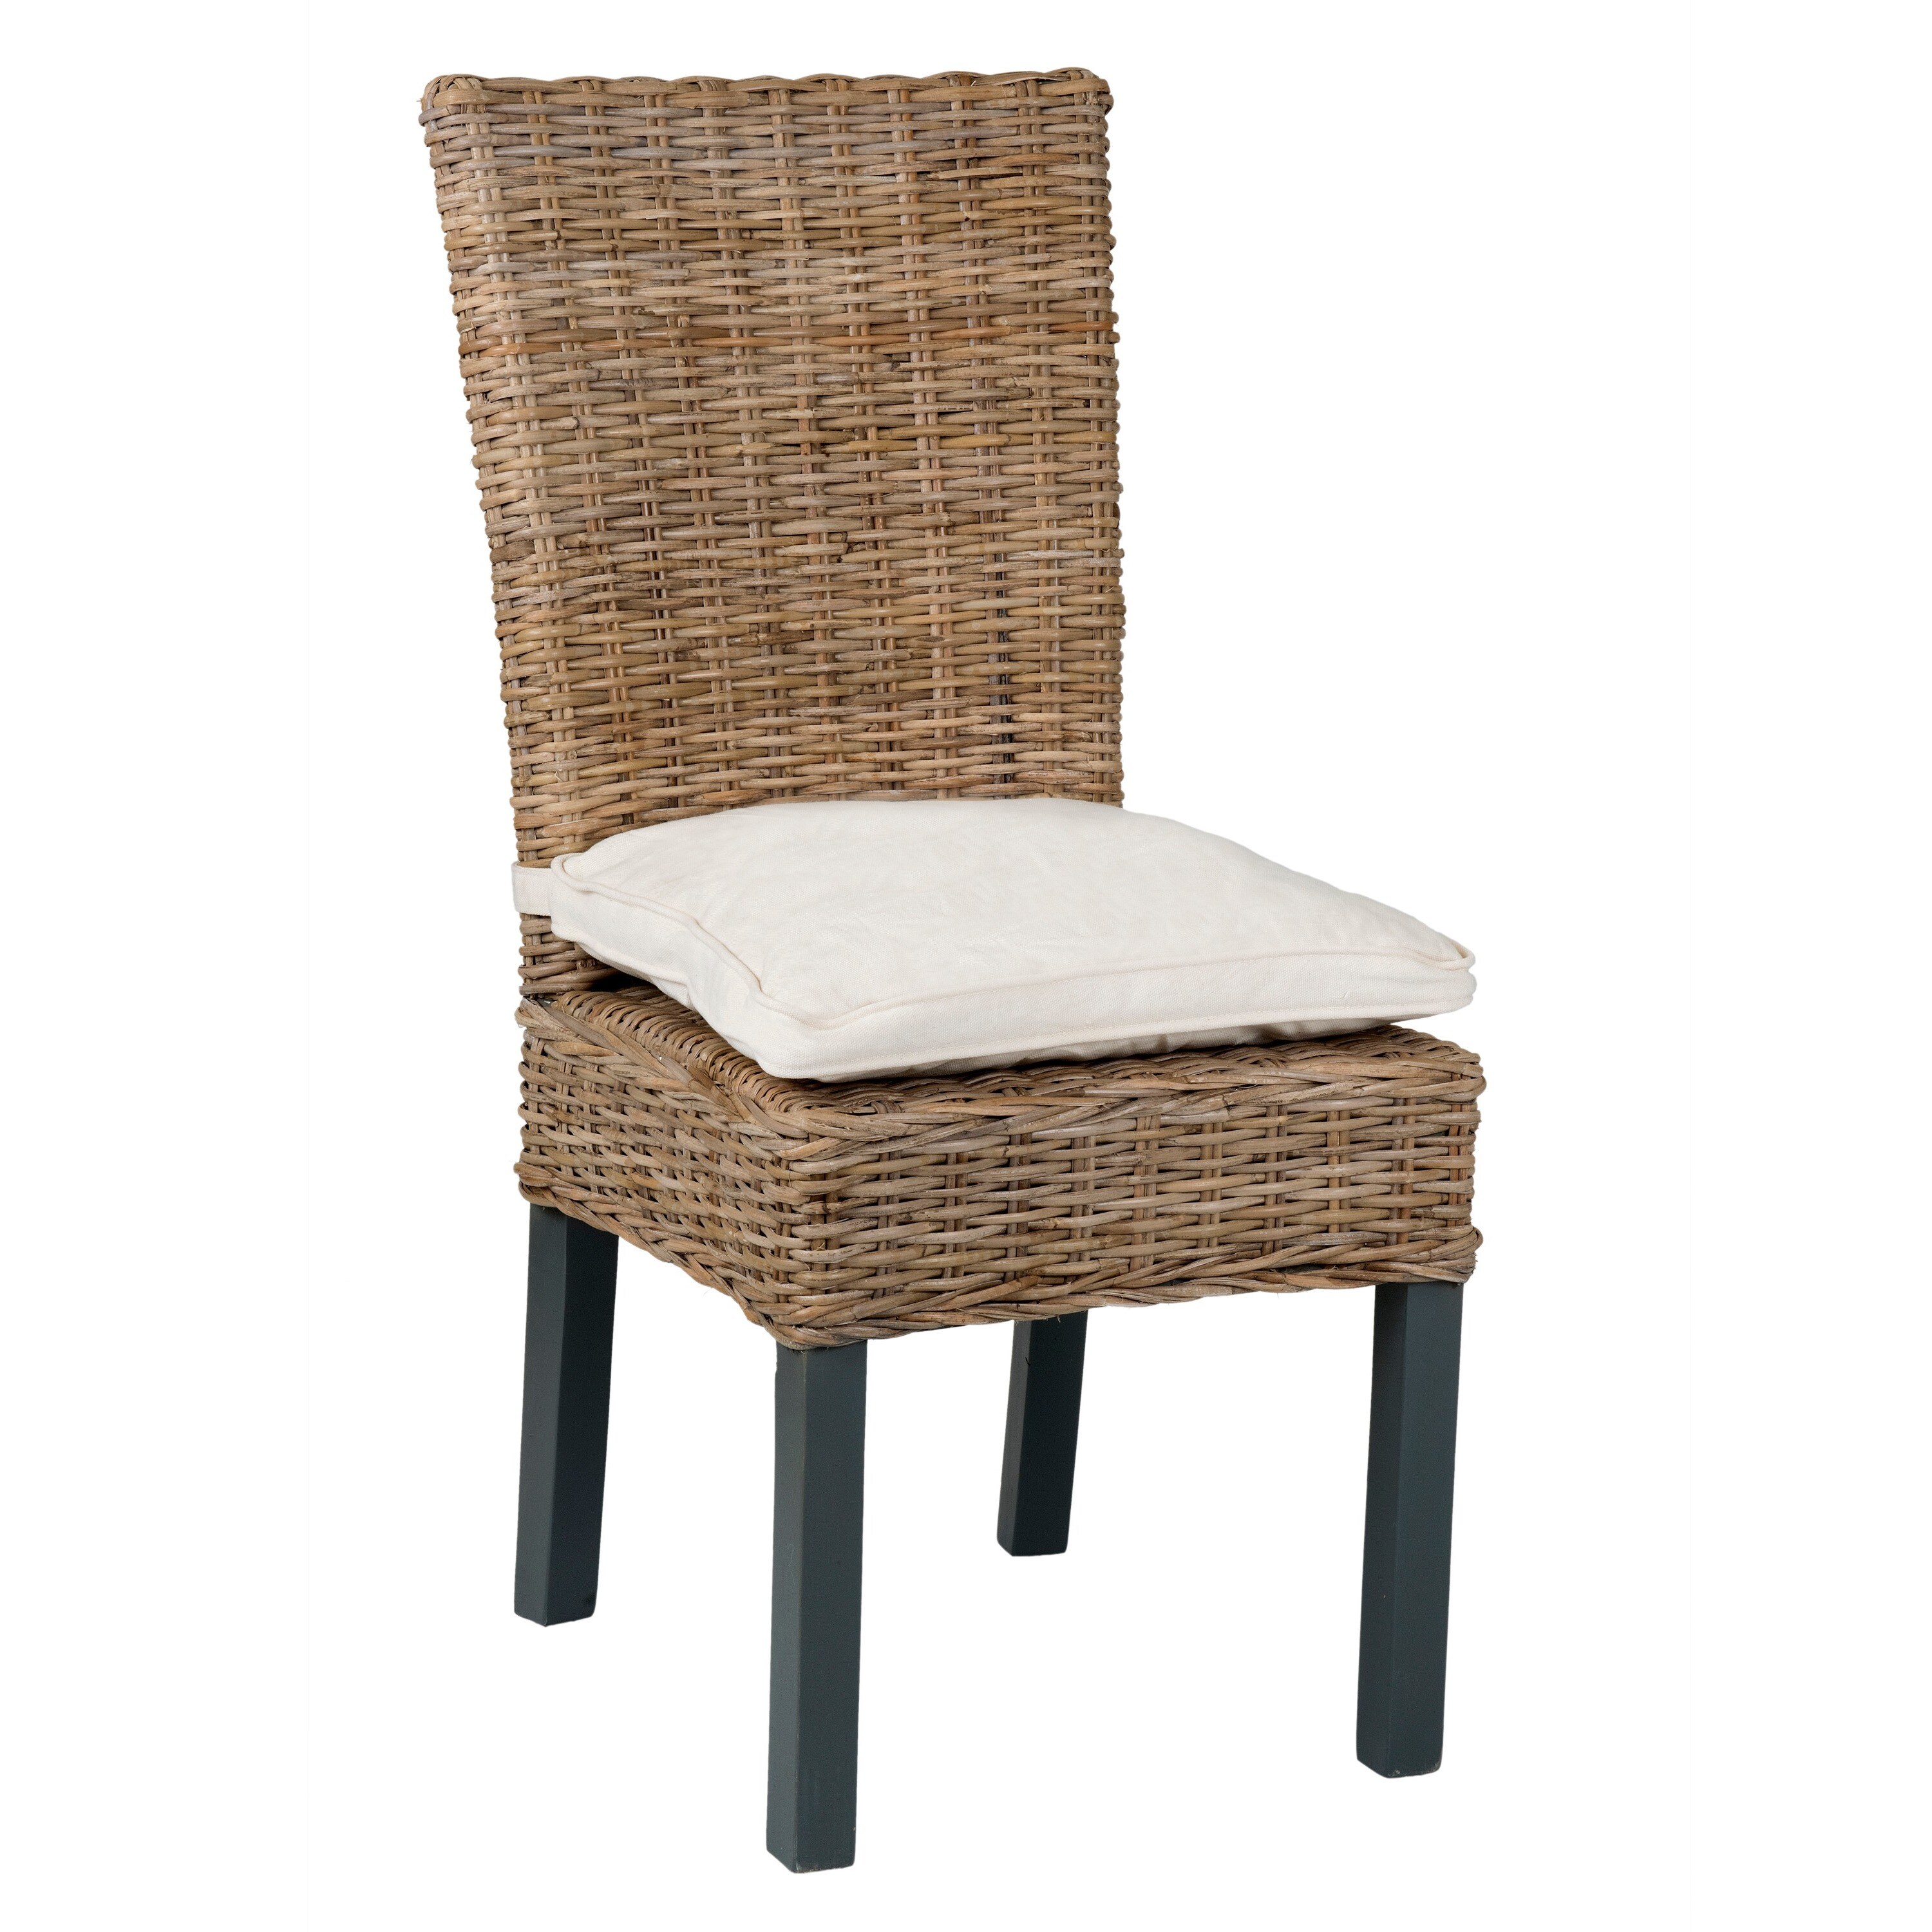 Shop Winnipeg Casual Brown Rattan Dining Chair - Free Shipping Today